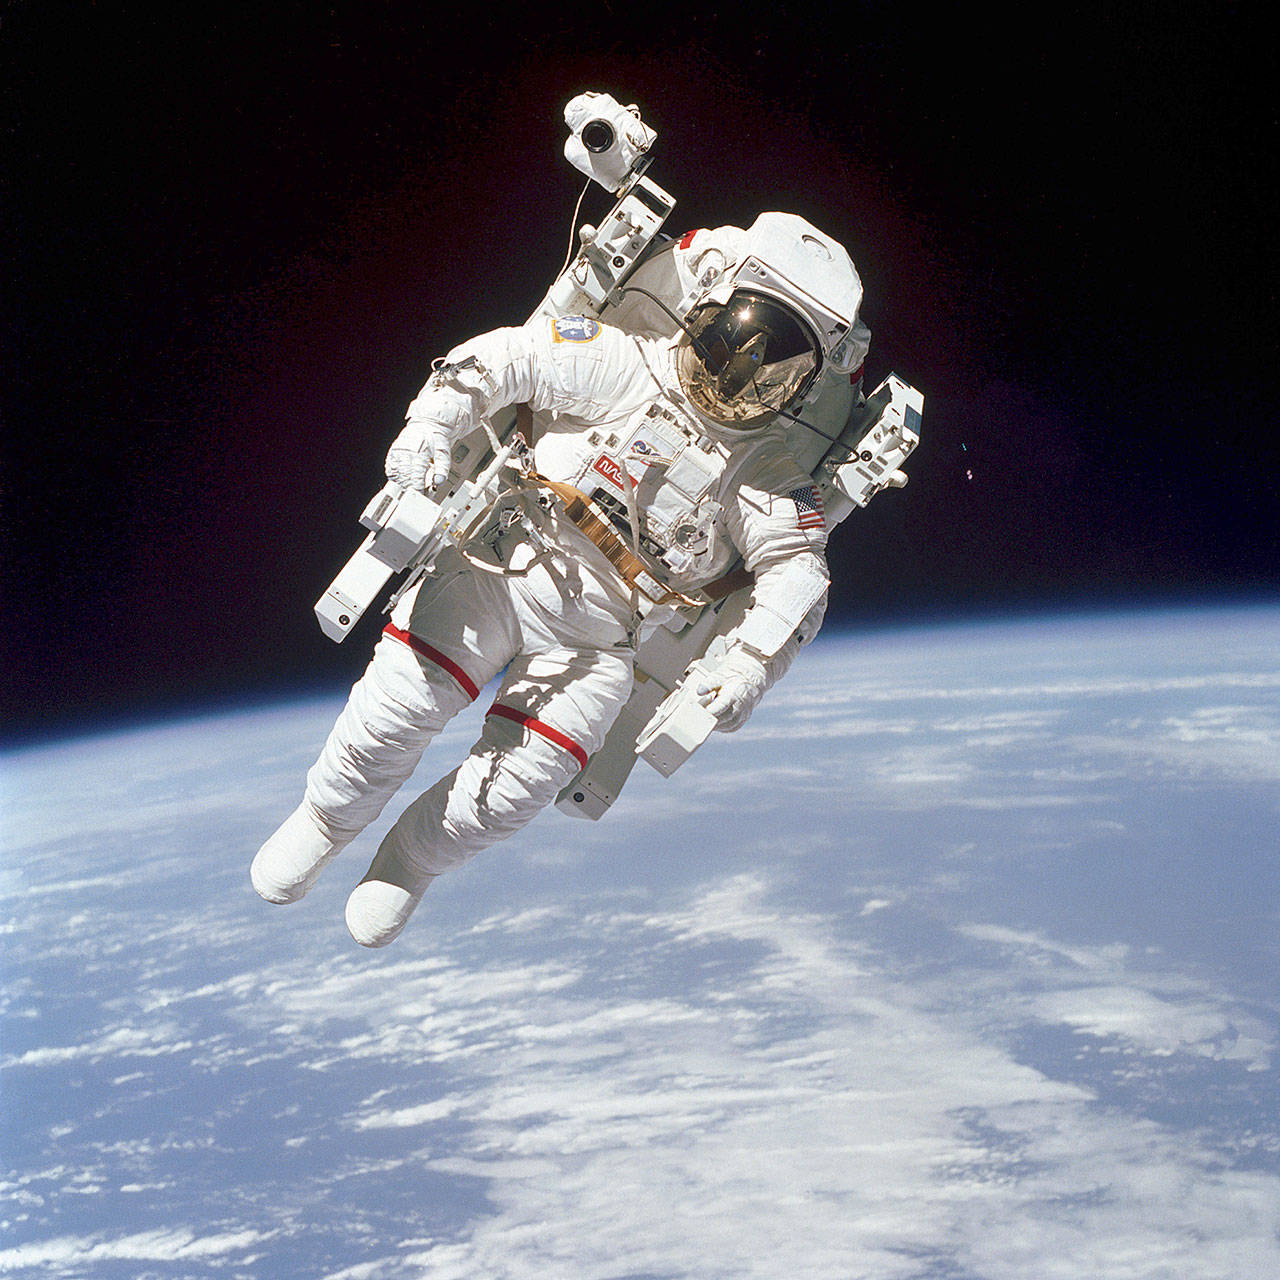 Astronaut Bruce McCandless takes part in an untethered spacewalk, using a nitrogen-propelled Manned Maneuvering Unit on Feb. 7, 1984. (NASA)